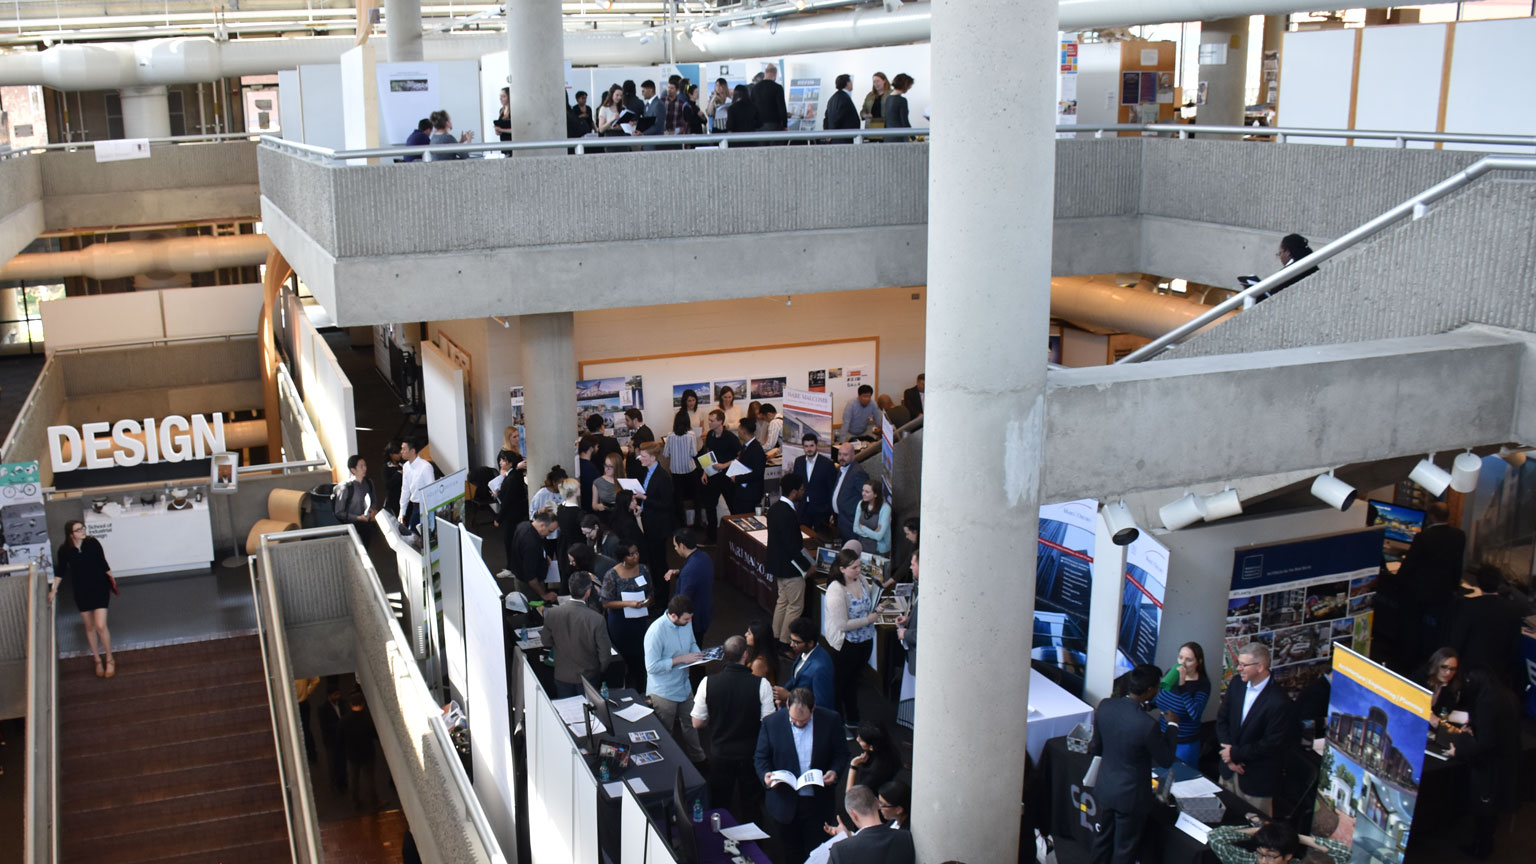 Career Fair 2018 occurring on all three levels of the Architecture West building.